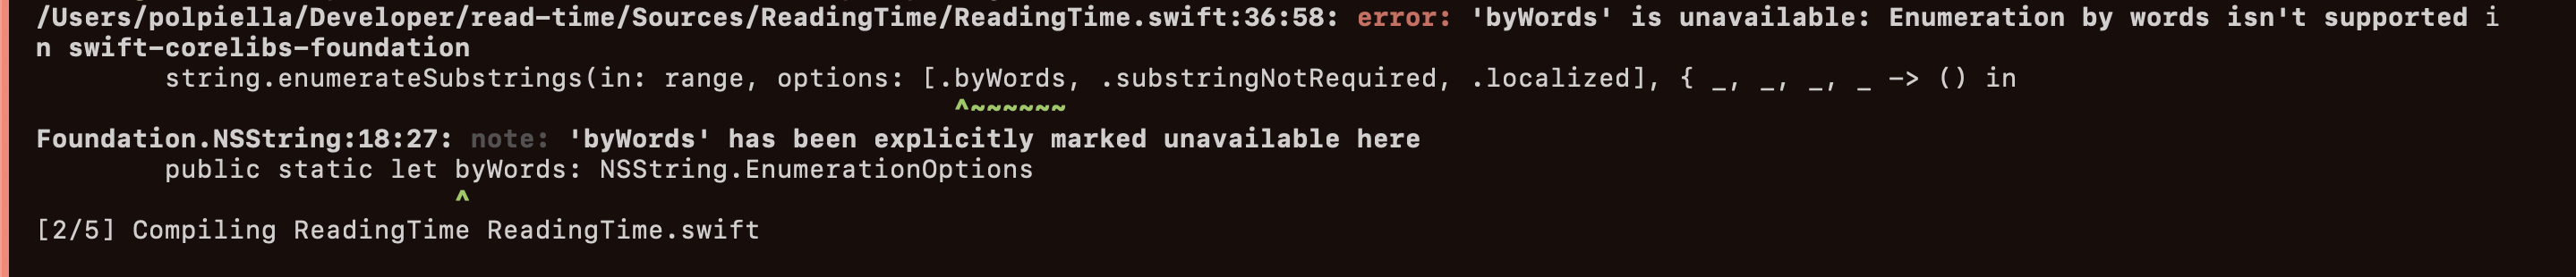 Error where byWords is not available in non-Apple platforms